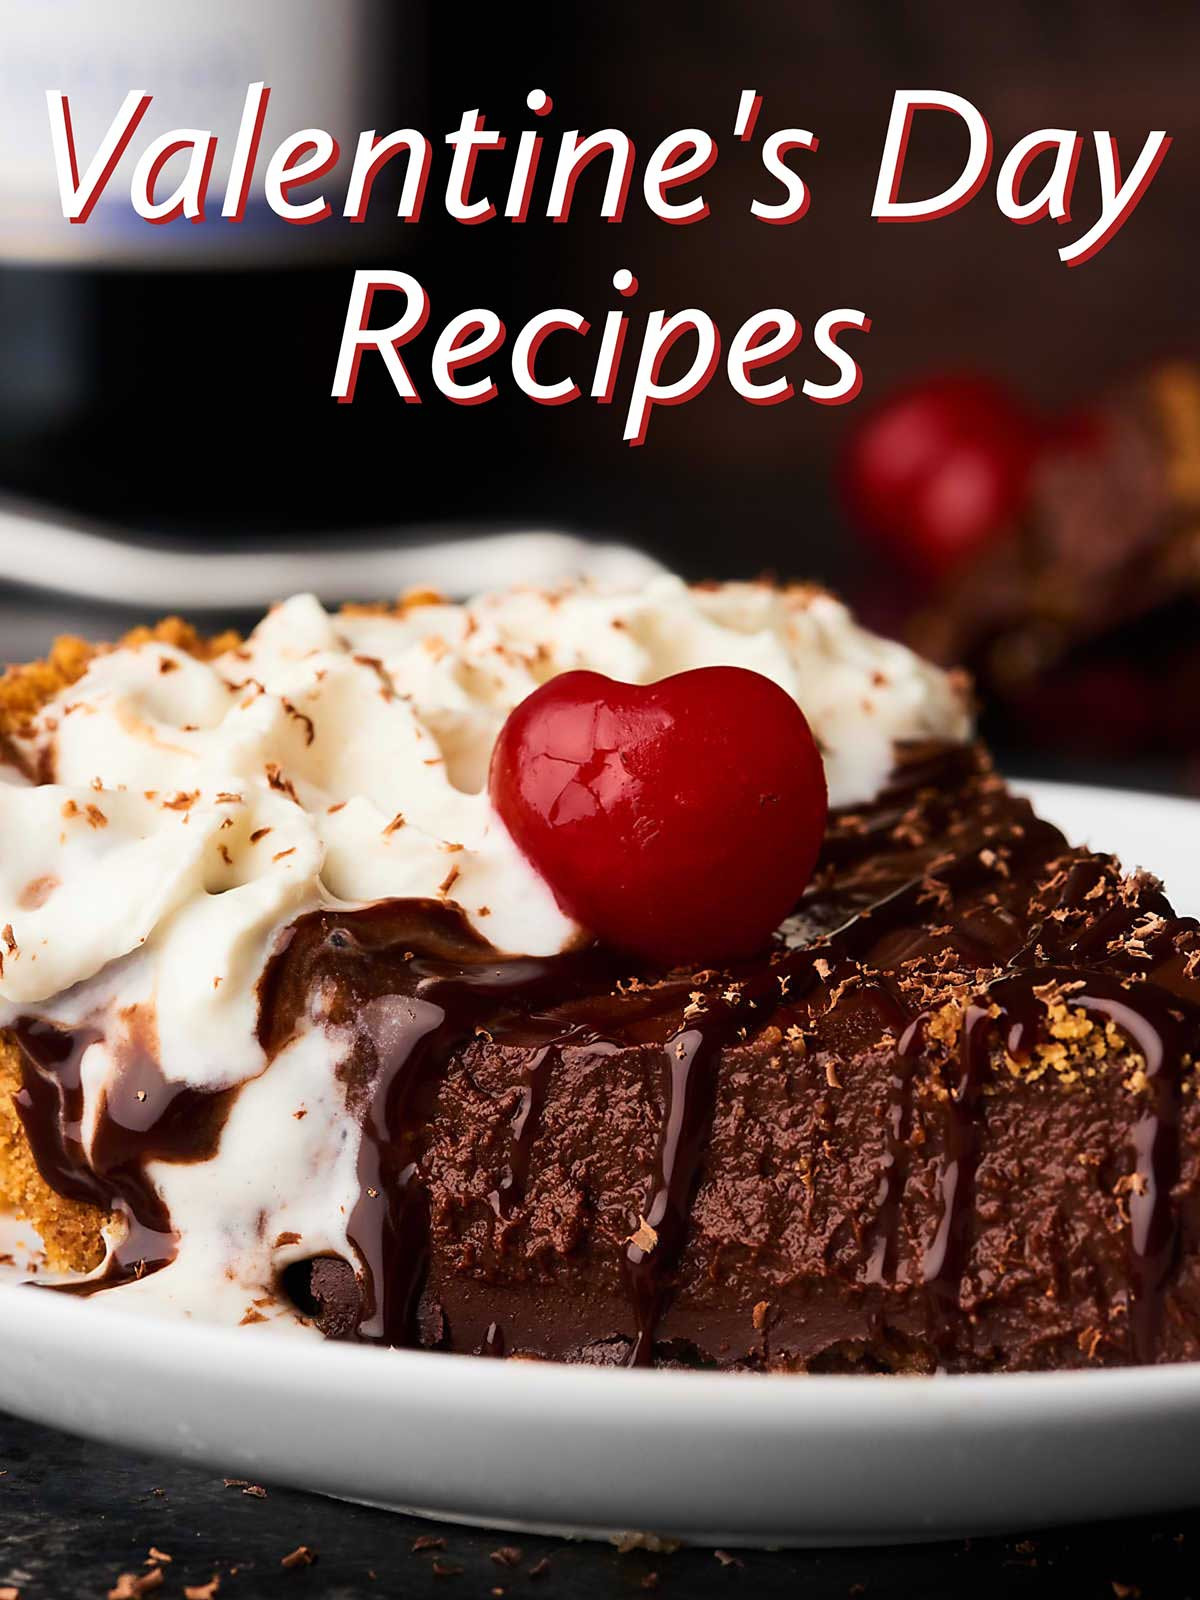 Valentines Desserts Recipes With Pictures
 Easy Valentine s Day Recipes 2017 Show Me the Yummy